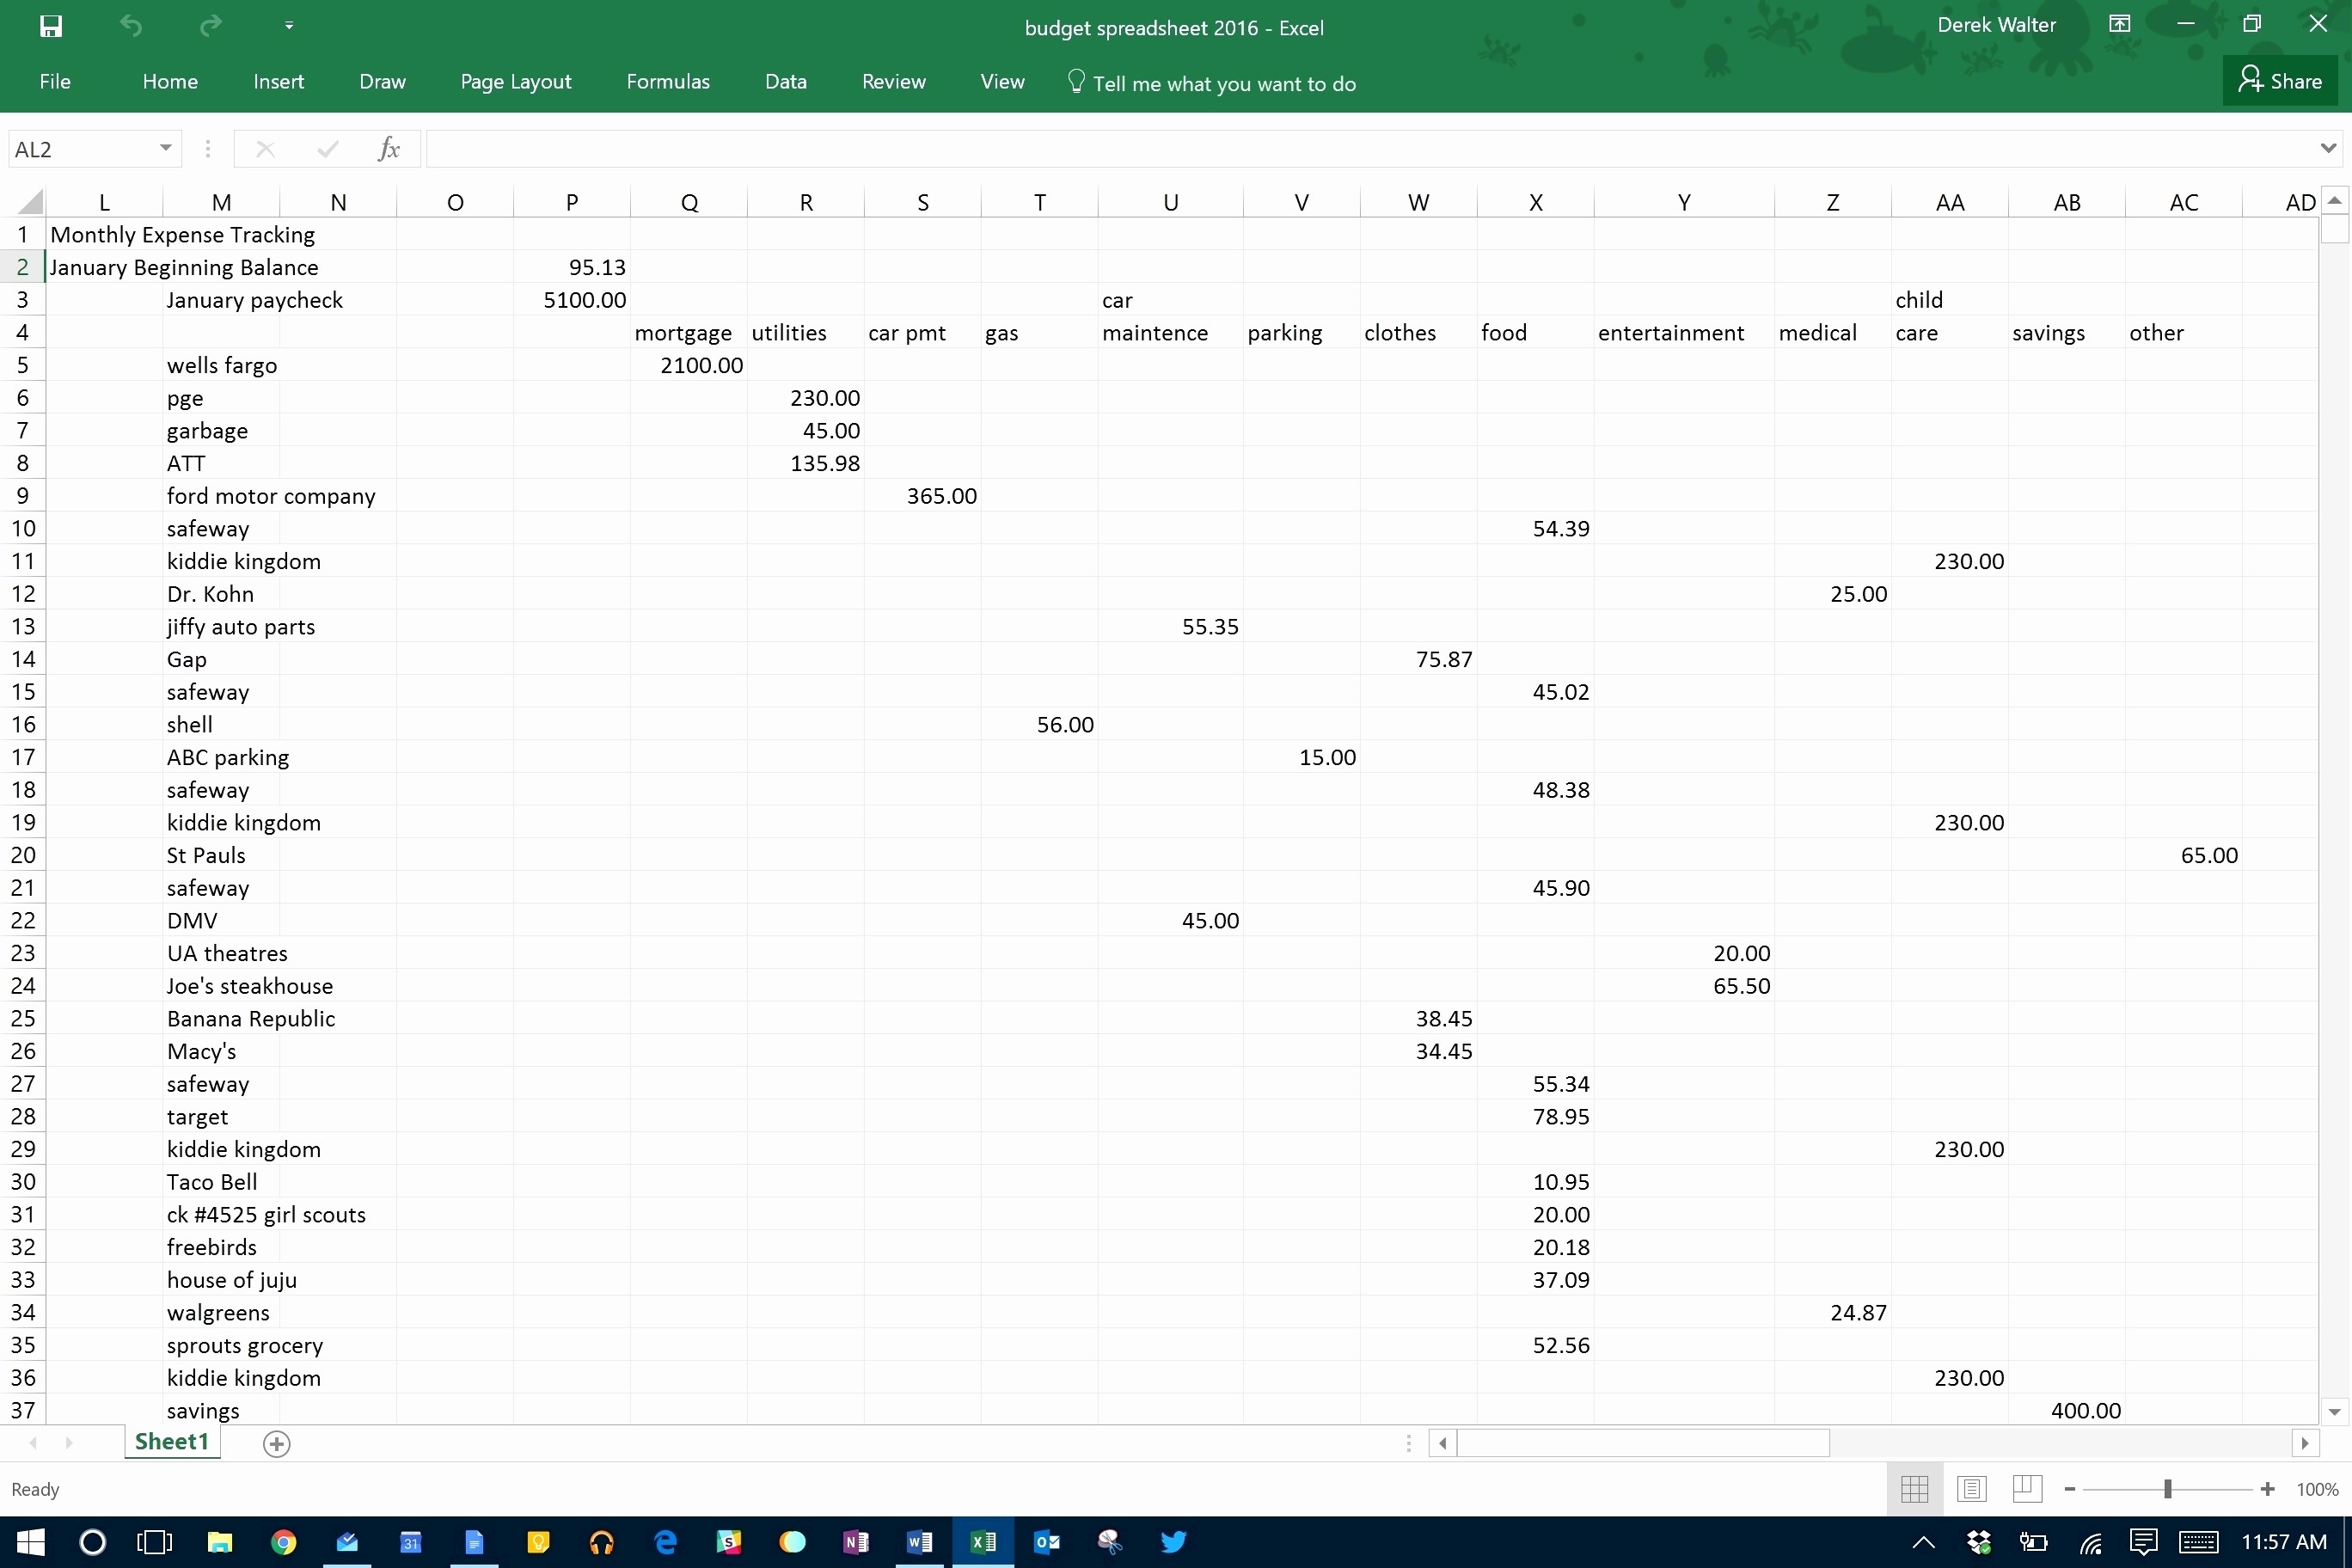 Cut And Fill Calculations Spreadsheet As App Excel Document